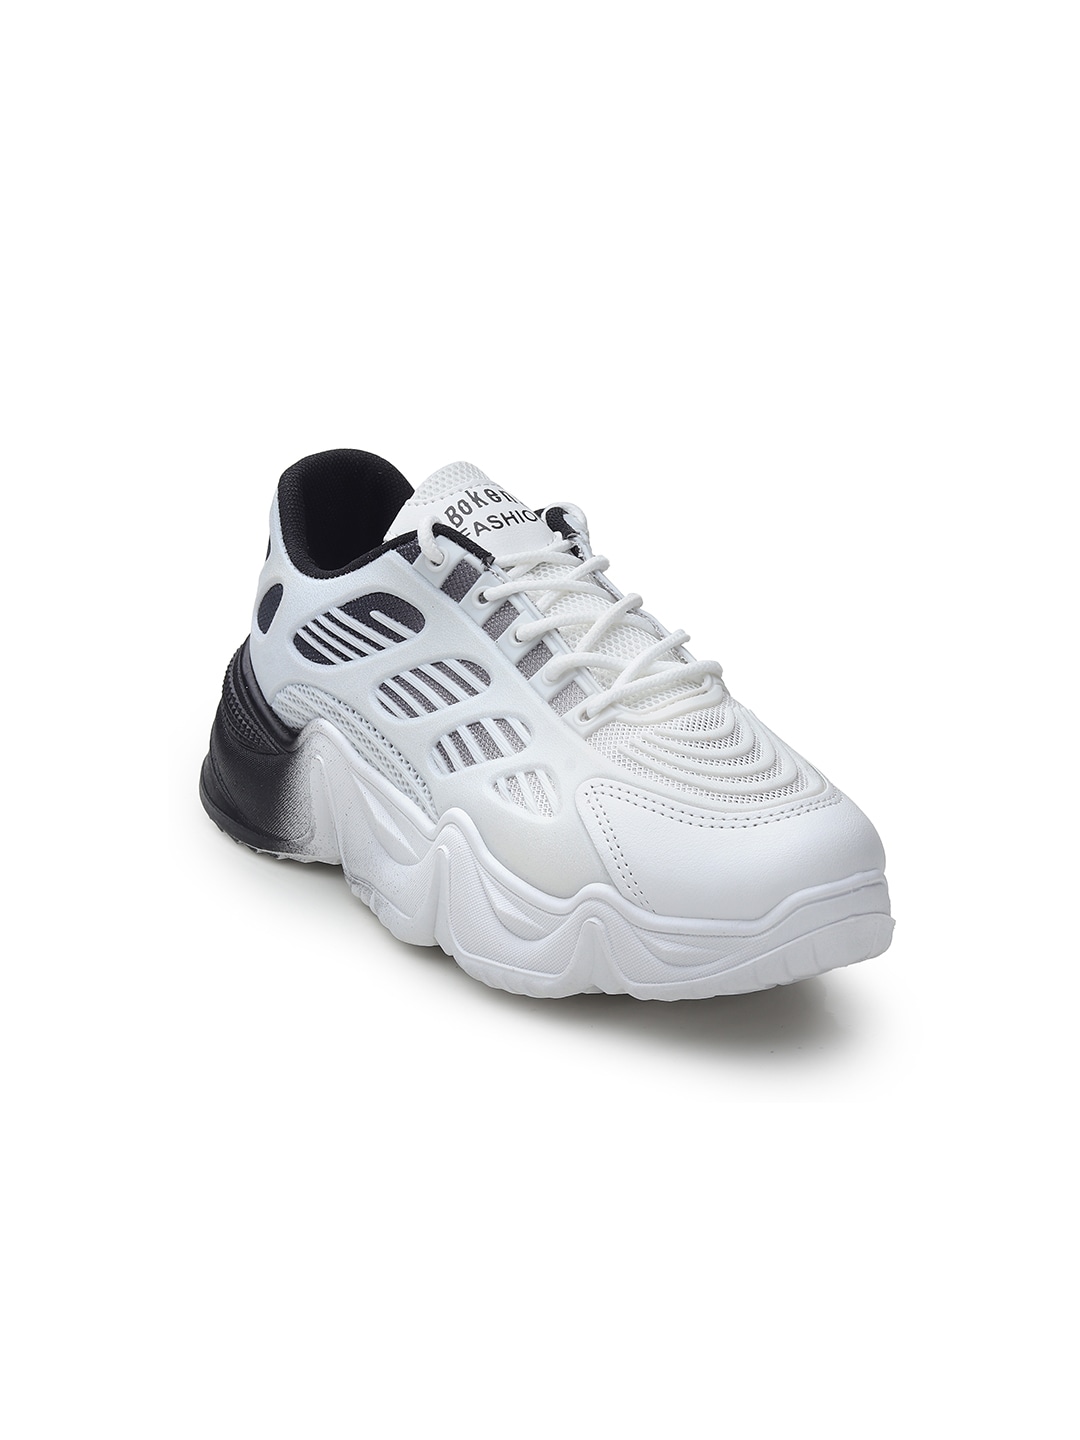 CASSIEY Women White & Black Mesh Walking Shoes Price in India